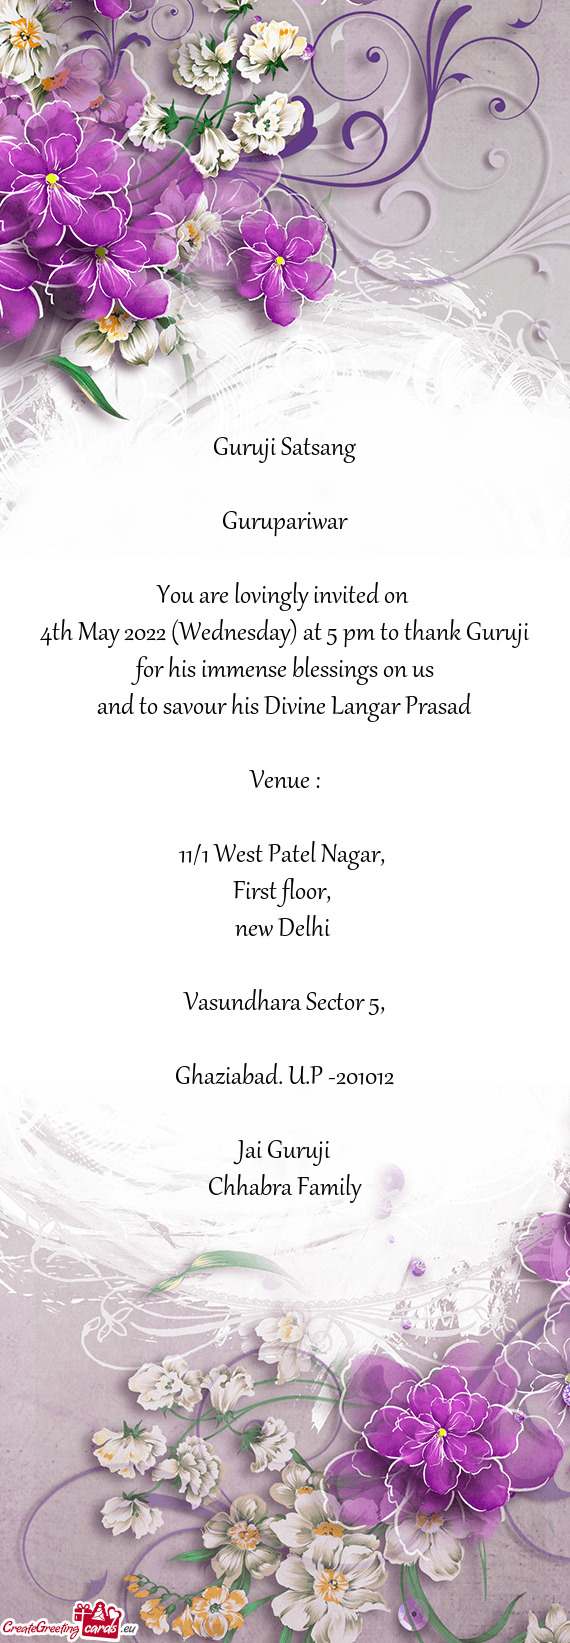 4th May 2022 (Wednesday) at 5 pm to thank Guruji for his immense blessings on us